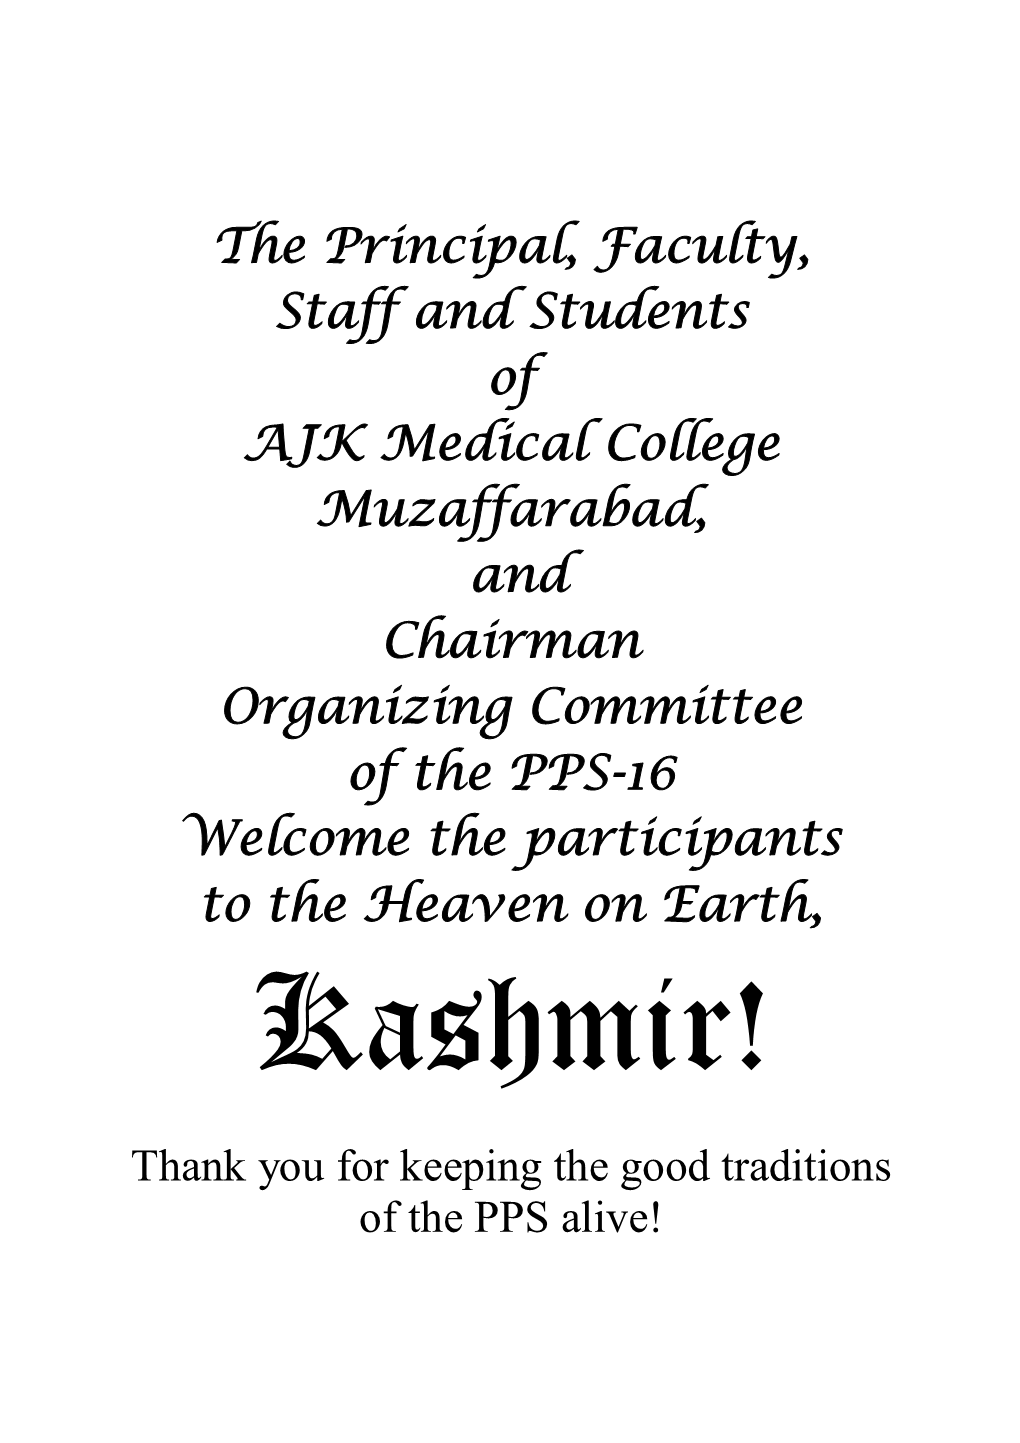 The Principal, Faculty, Staff and Students of AJK Medical College Muzaffarabad, and Chairman Organizing Committee of the PPS-16